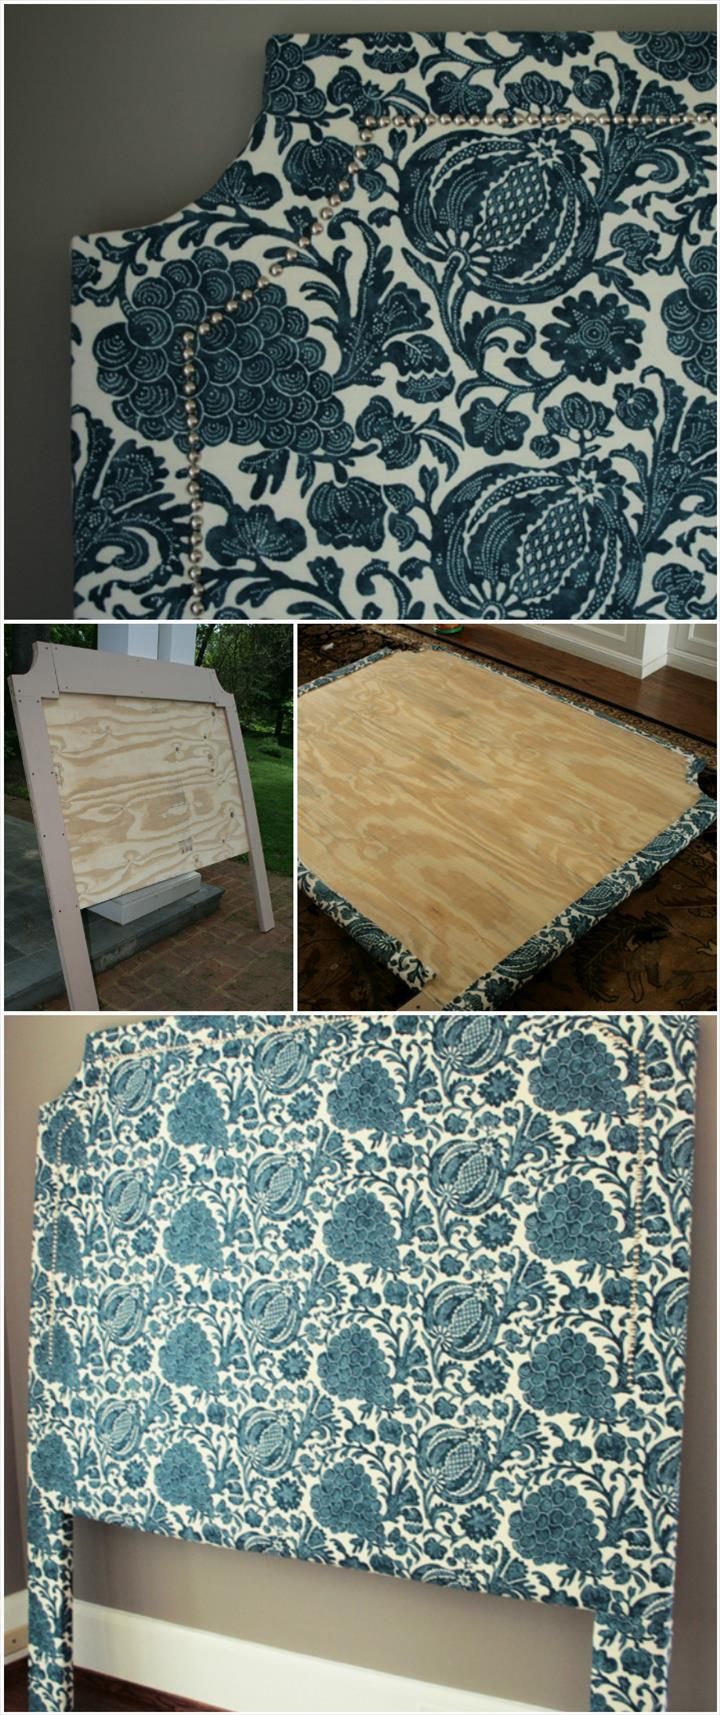 Upholstered Headboard with Accent Nail Head Trim: -   Superb DIY Headboard Ideas